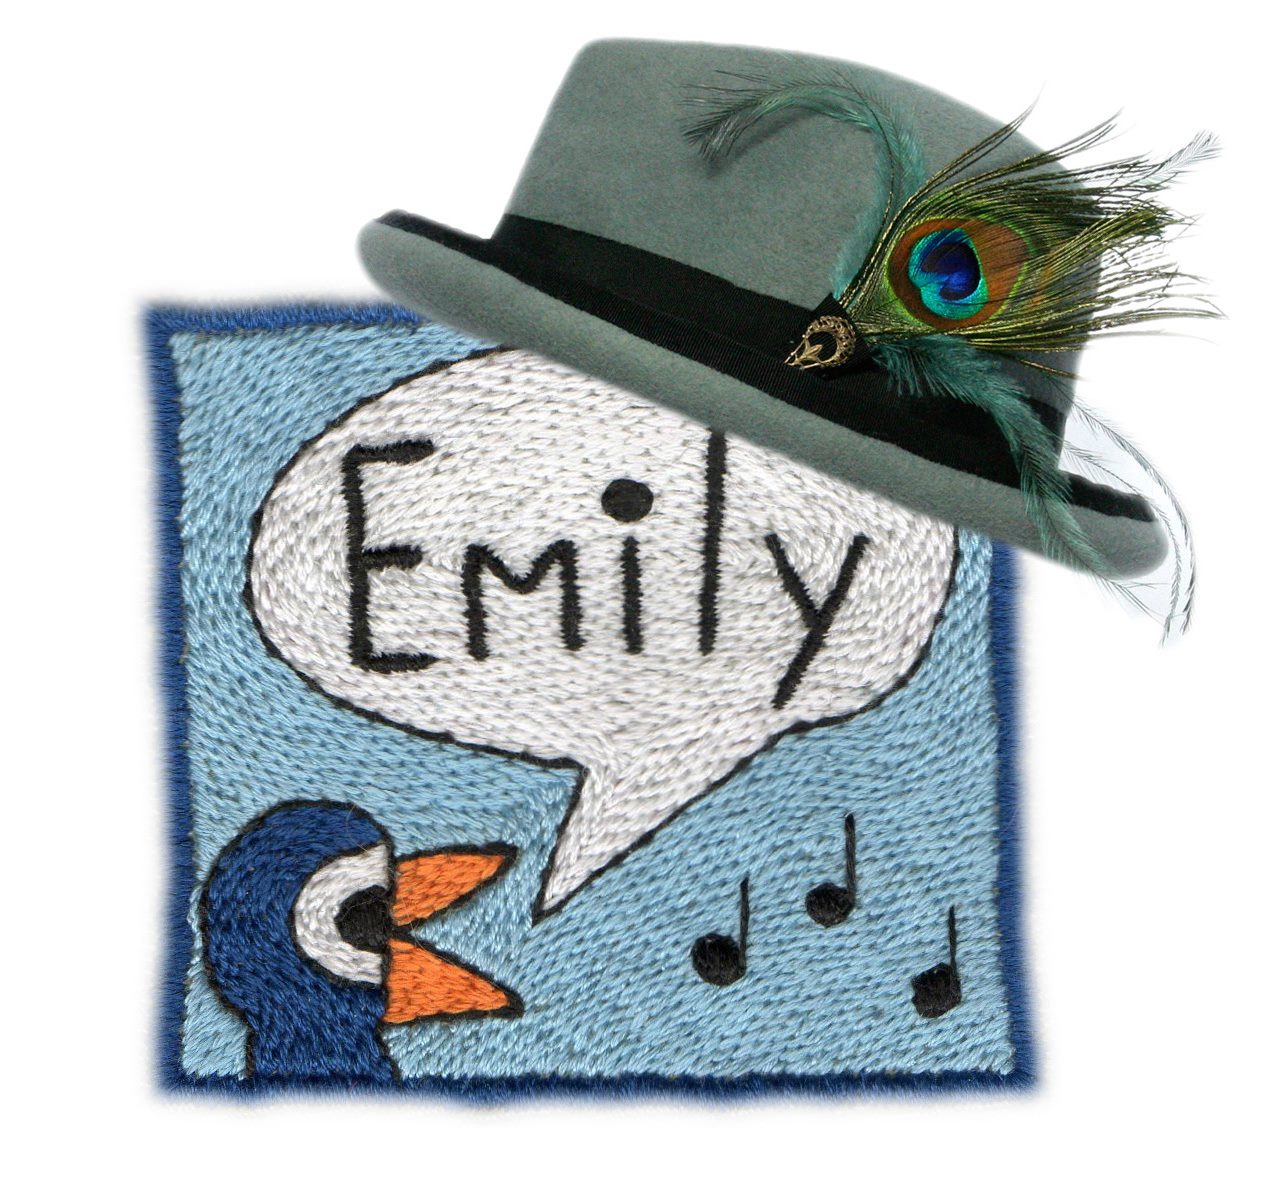 Millinery Operations – Emily Moe